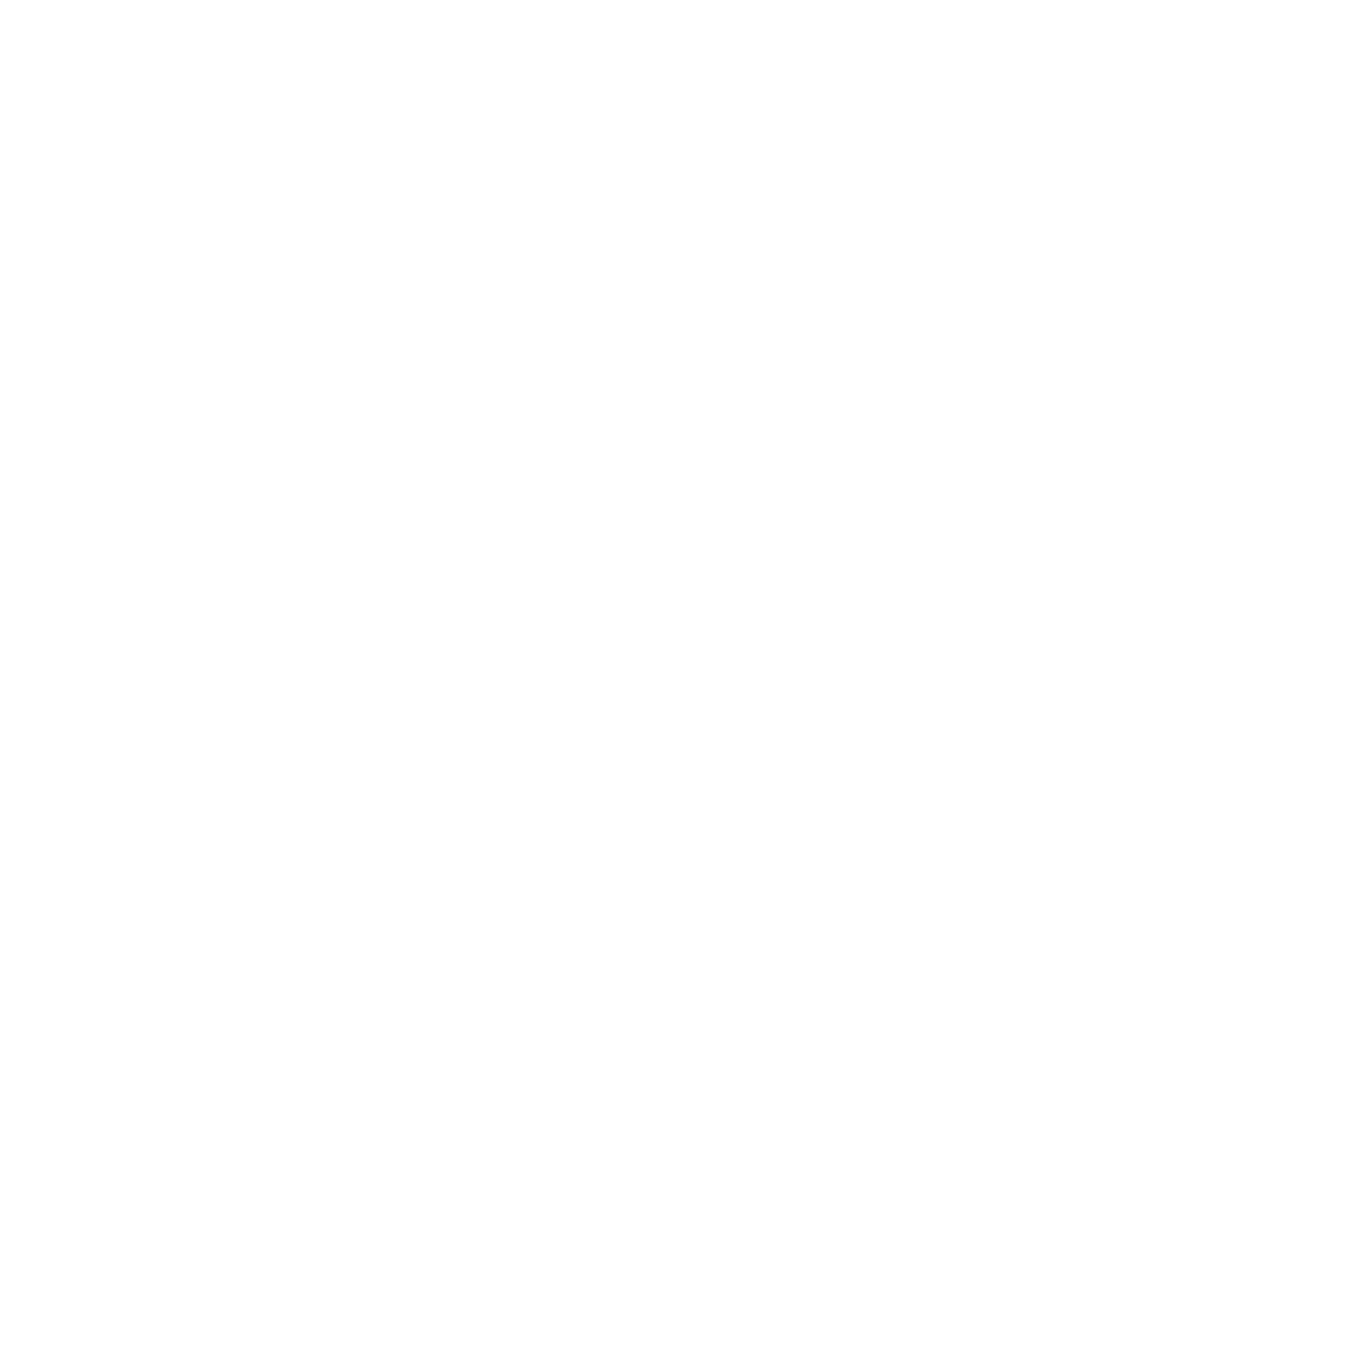 Drop the planets image